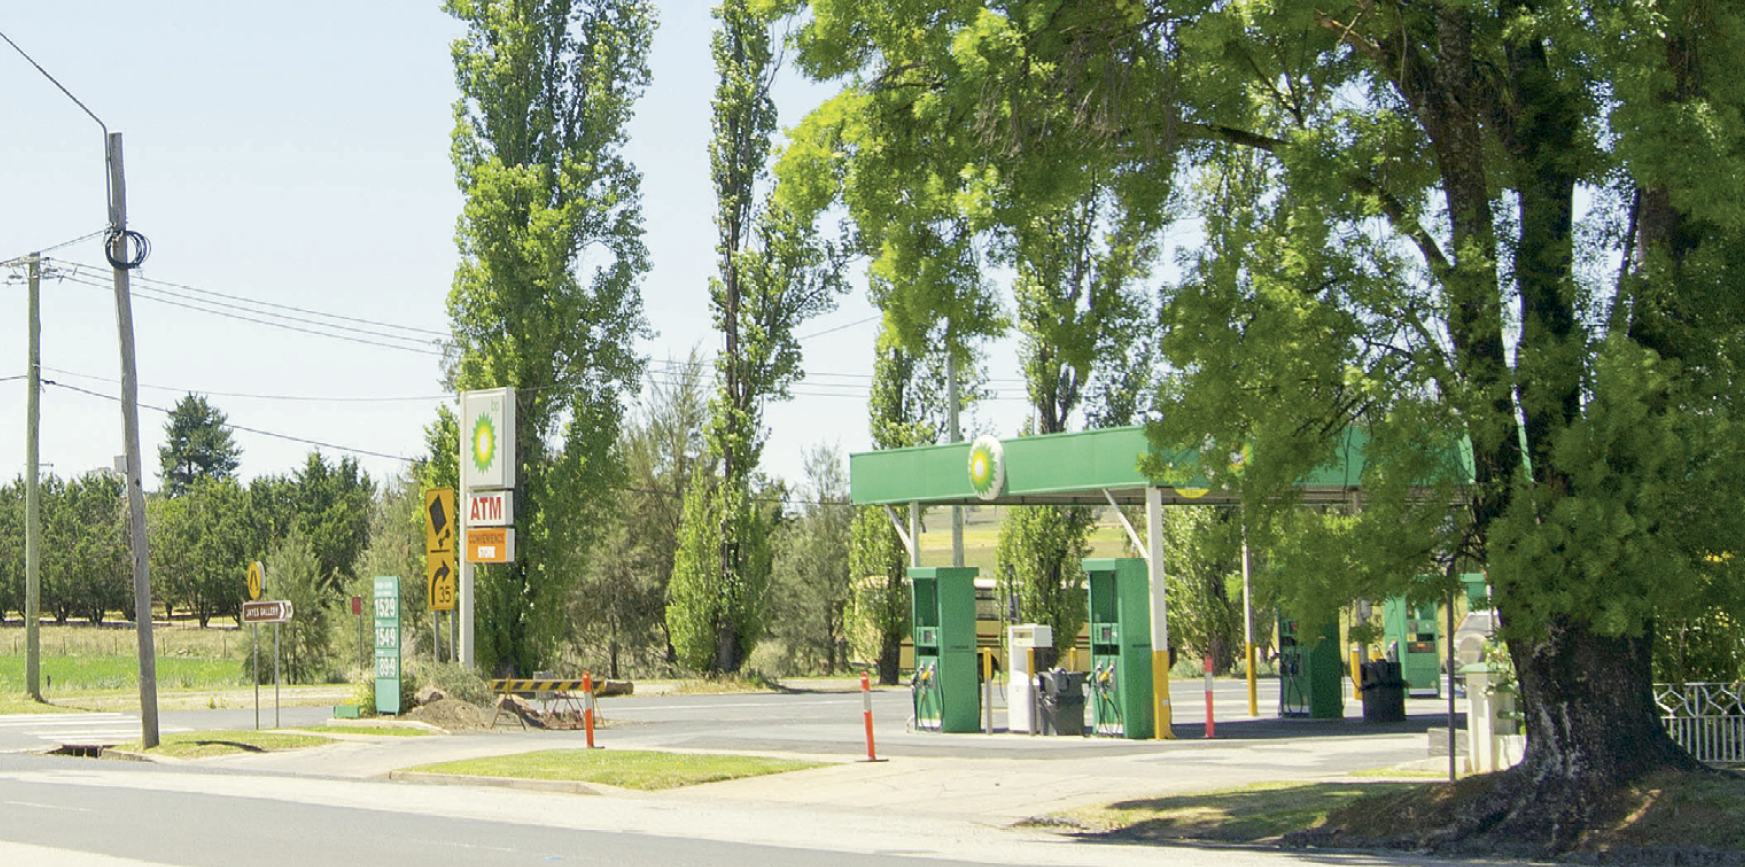 A BP petrol station surrounded by grassed areas and tall trees.